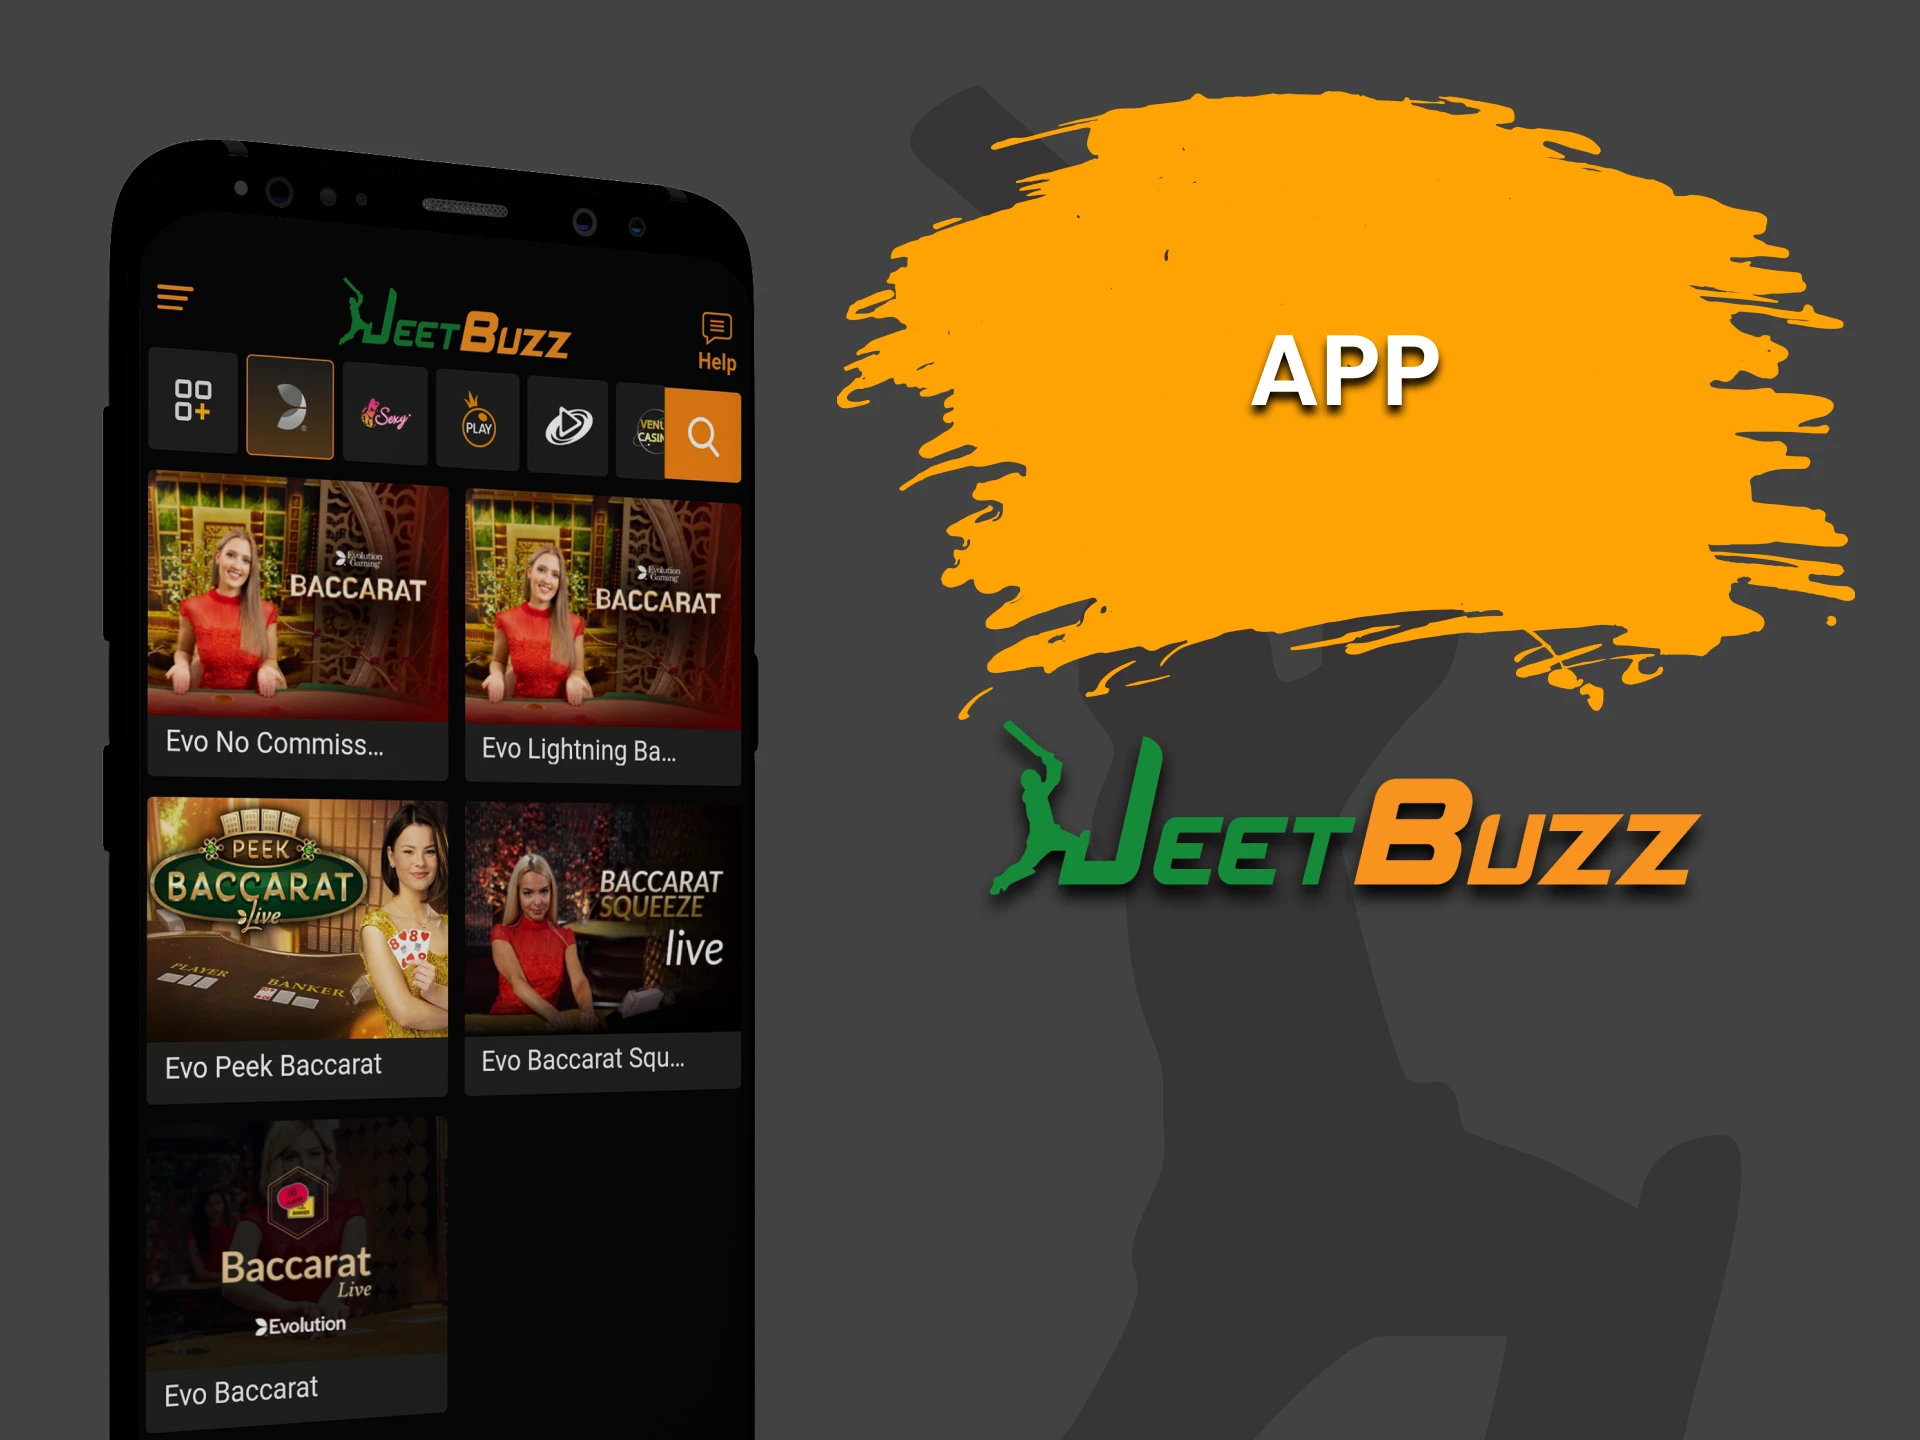 Download JeetBuzz app to play Baccarat.